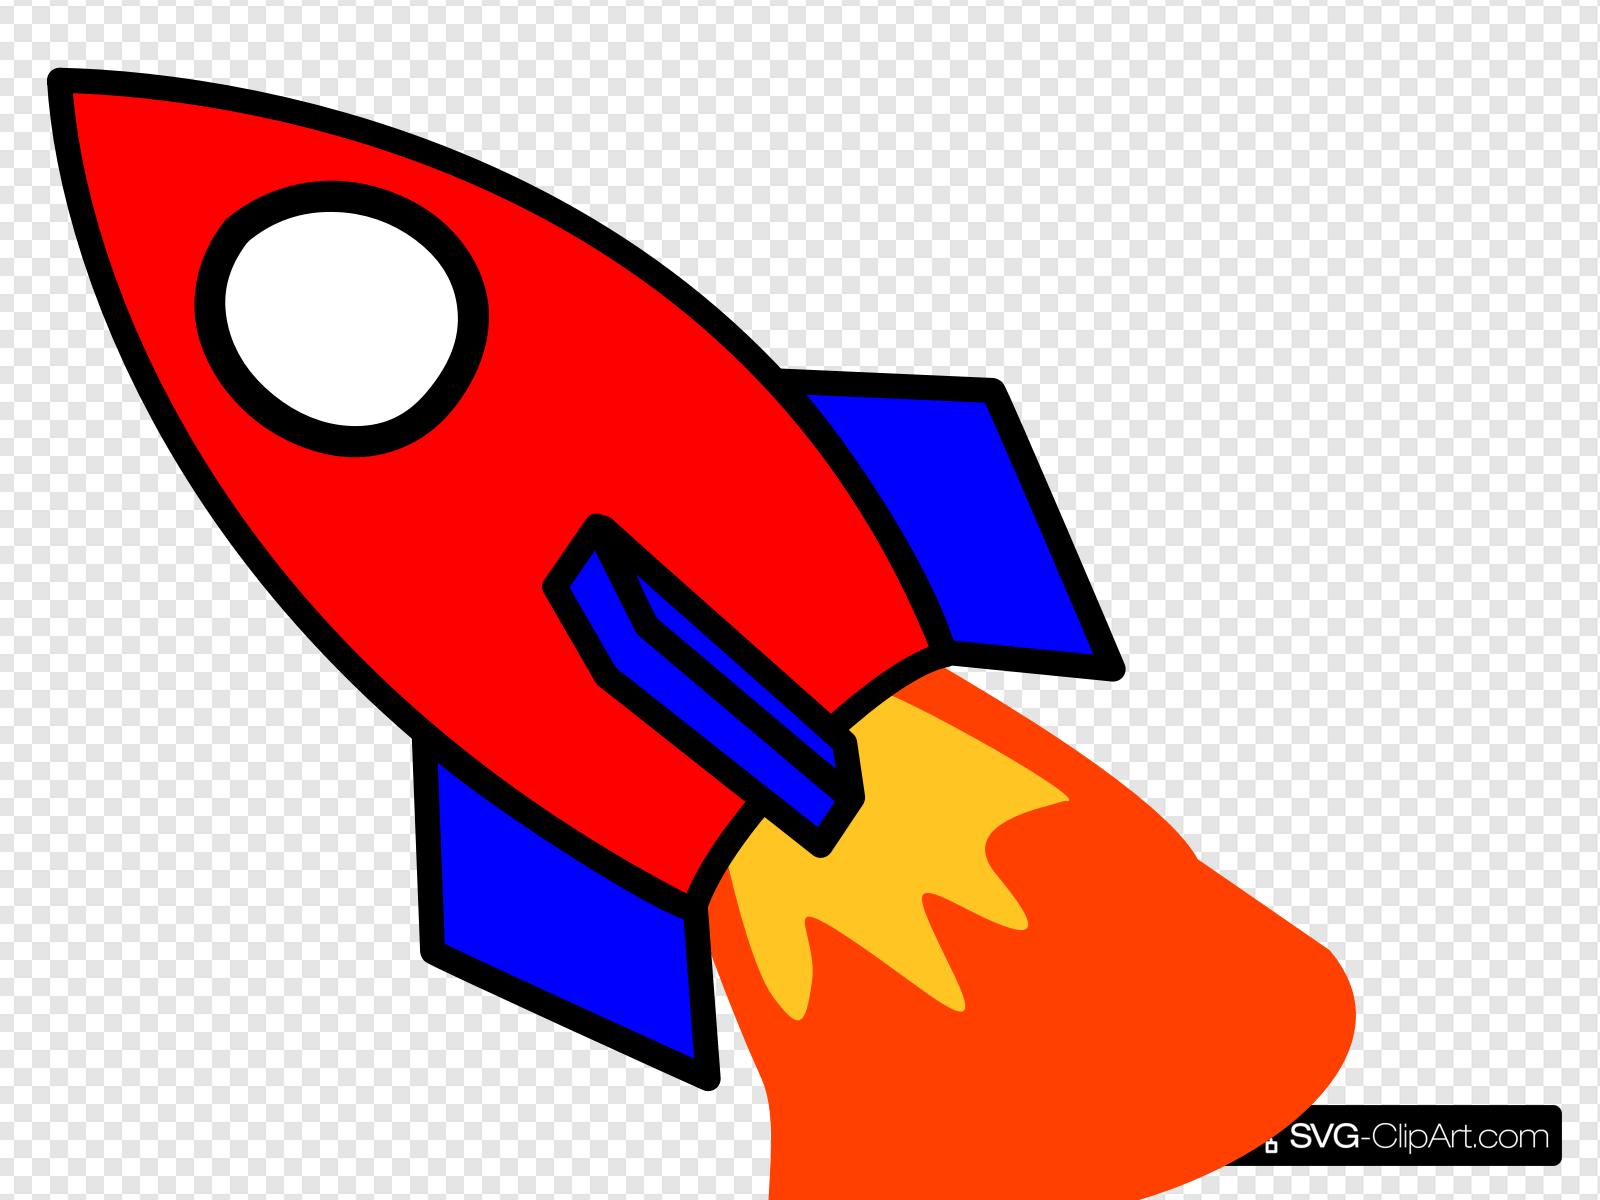 Red And Blue Rocket Clip art, Icon and SVG